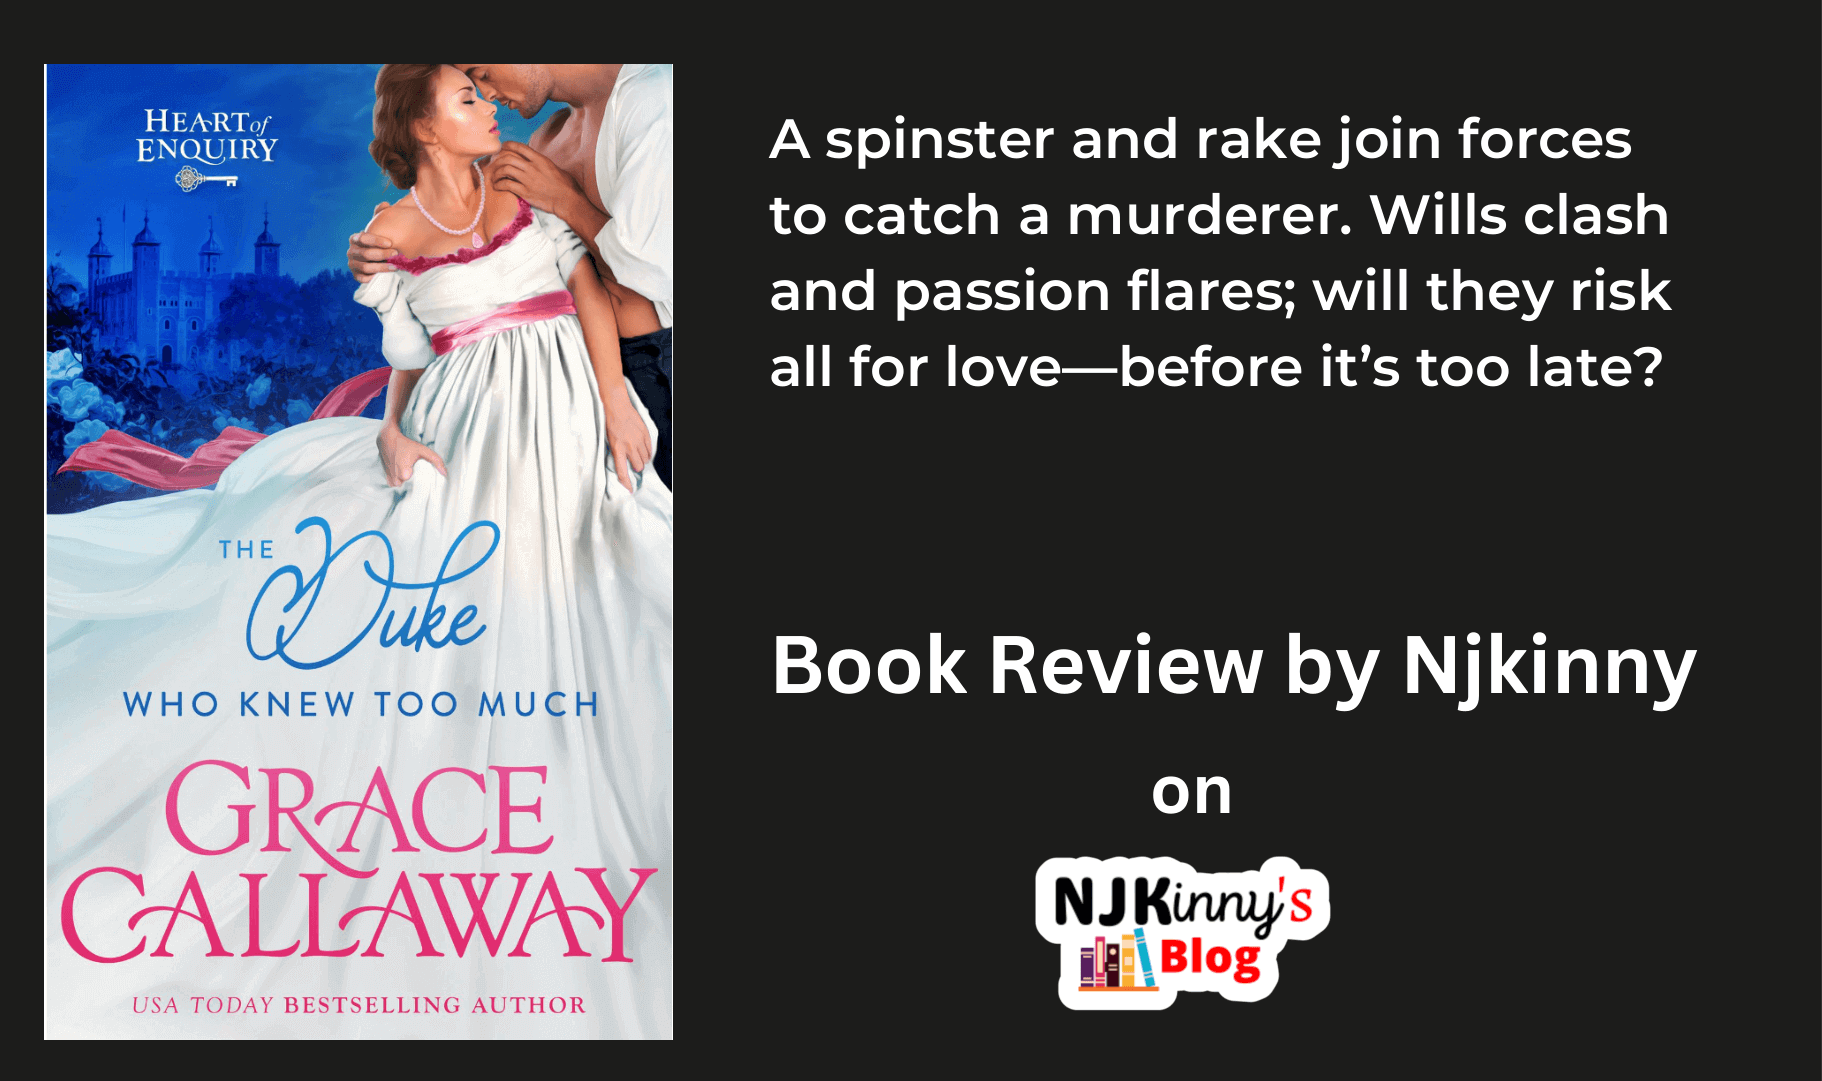 The Duke Who KNew Too Much by Grace Callaway Book Review, Book Summary, Book Quotes, Genre, Reading Age, "Heart of Enquiry" Series Reading Order on Njkinny's Blog